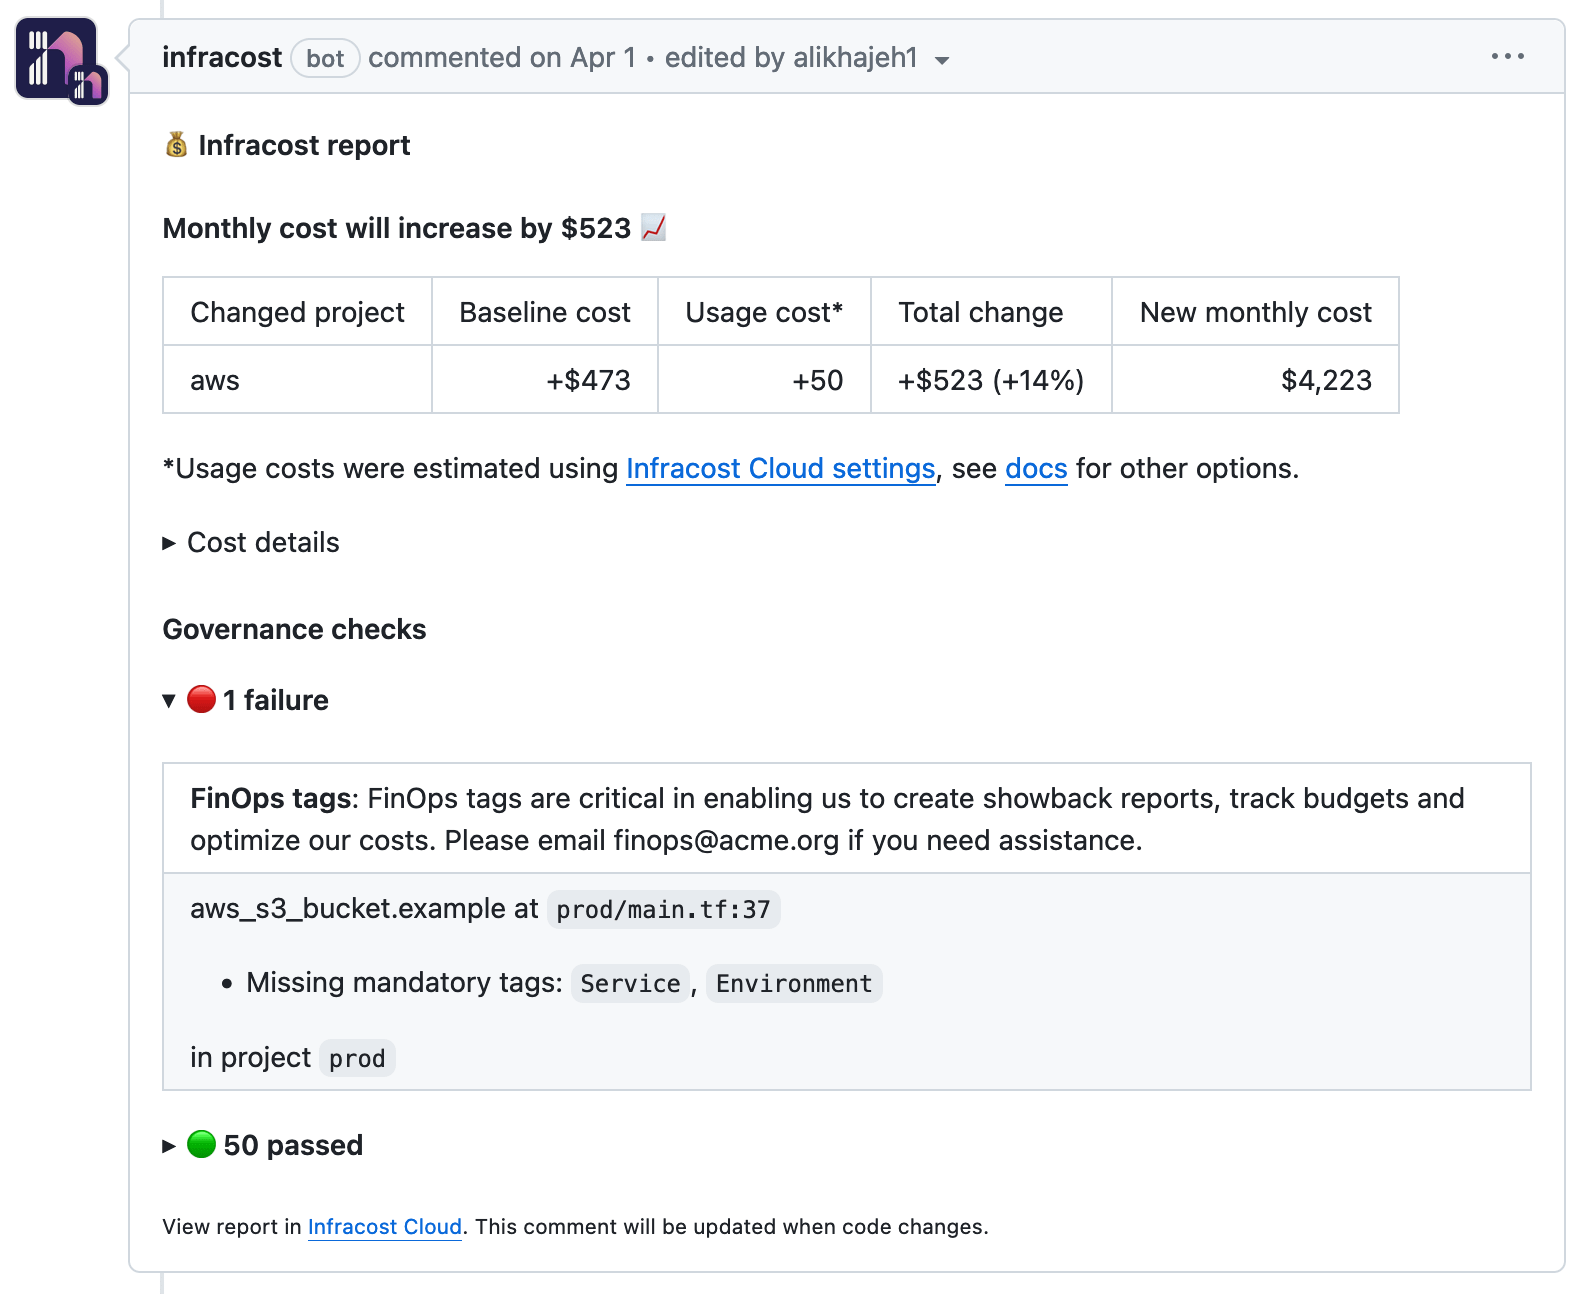 Create a pull request to test your tagging policy.